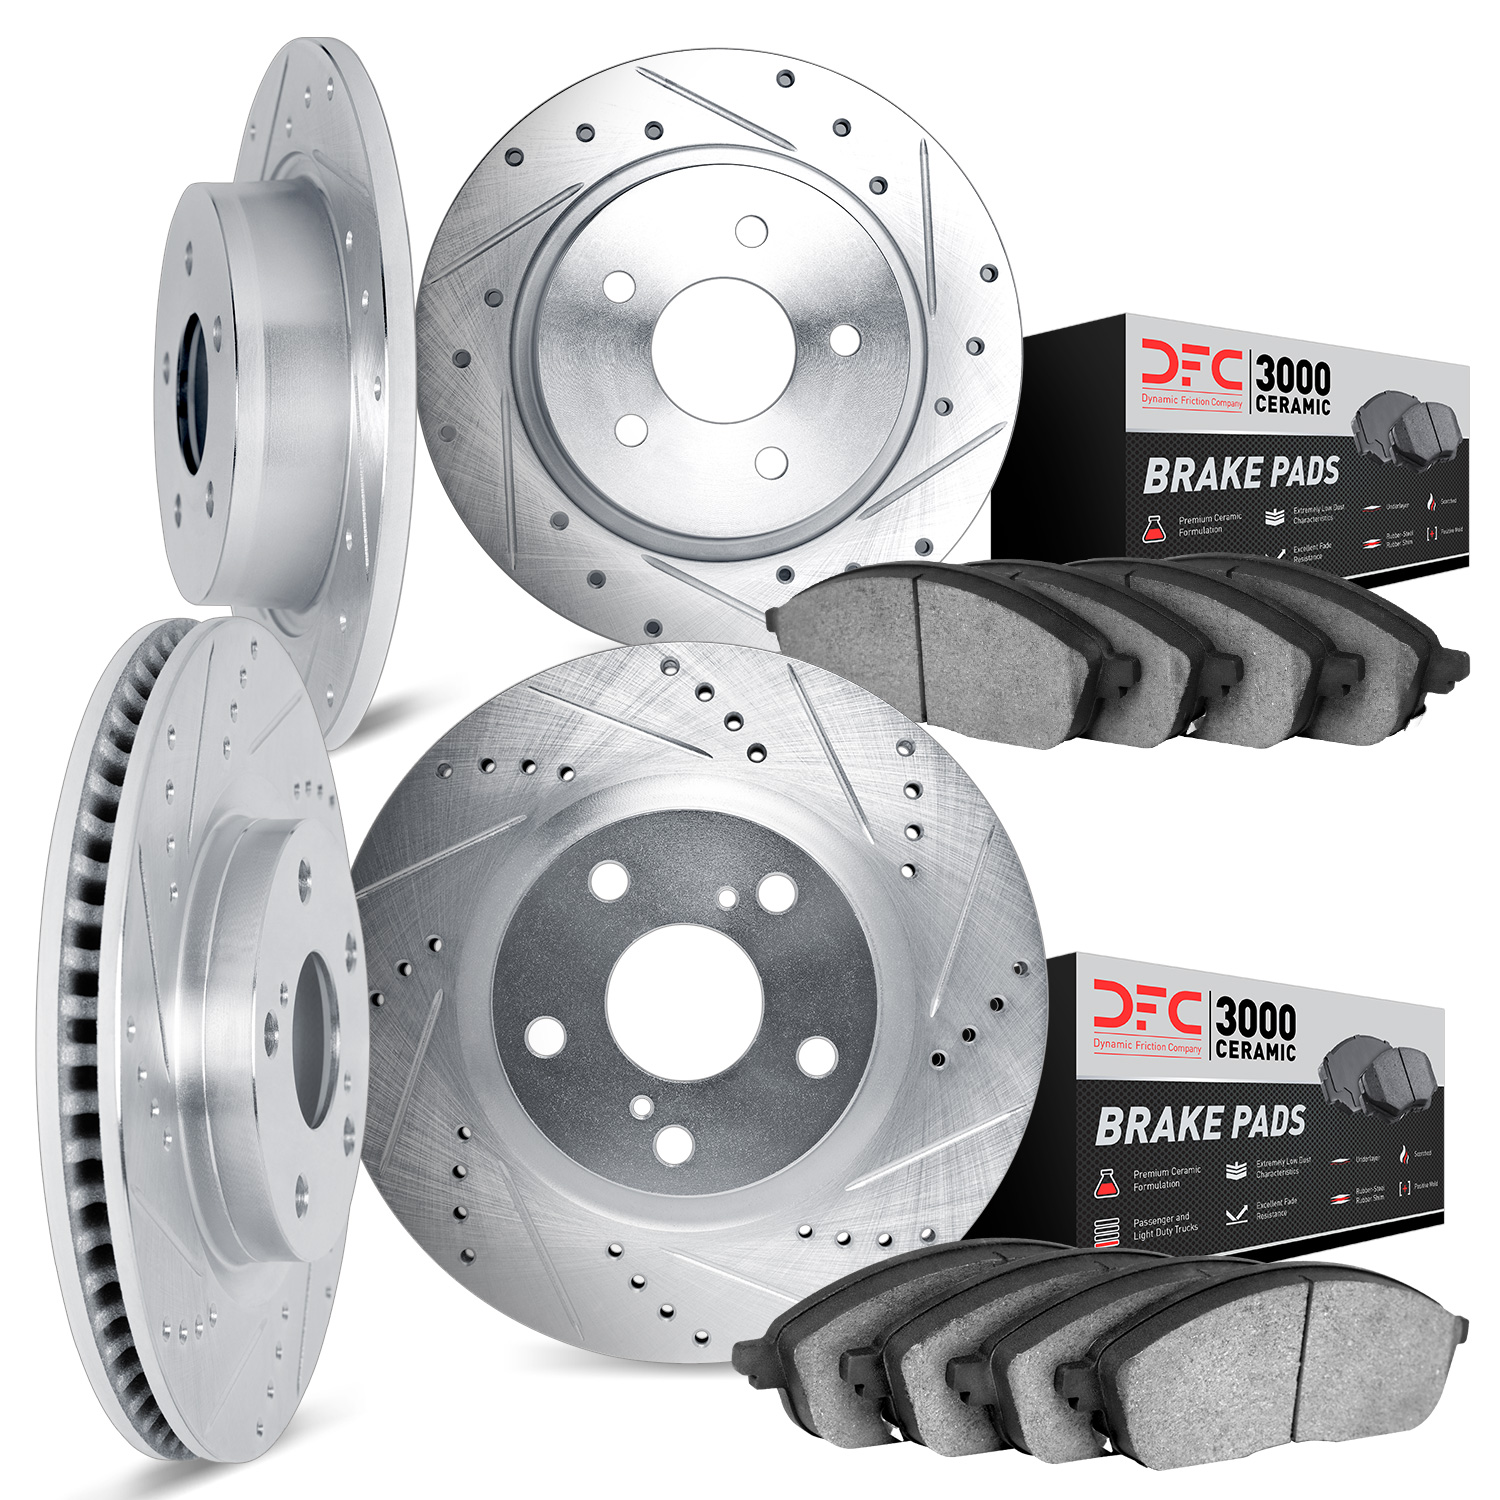 7304-80019 Drilled/Slotted Brake Rotor with 3000-Series Ceramic Brake Pads Kit [Silver], 1995-2000 Ford/Lincoln/Mercury/Mazda, P